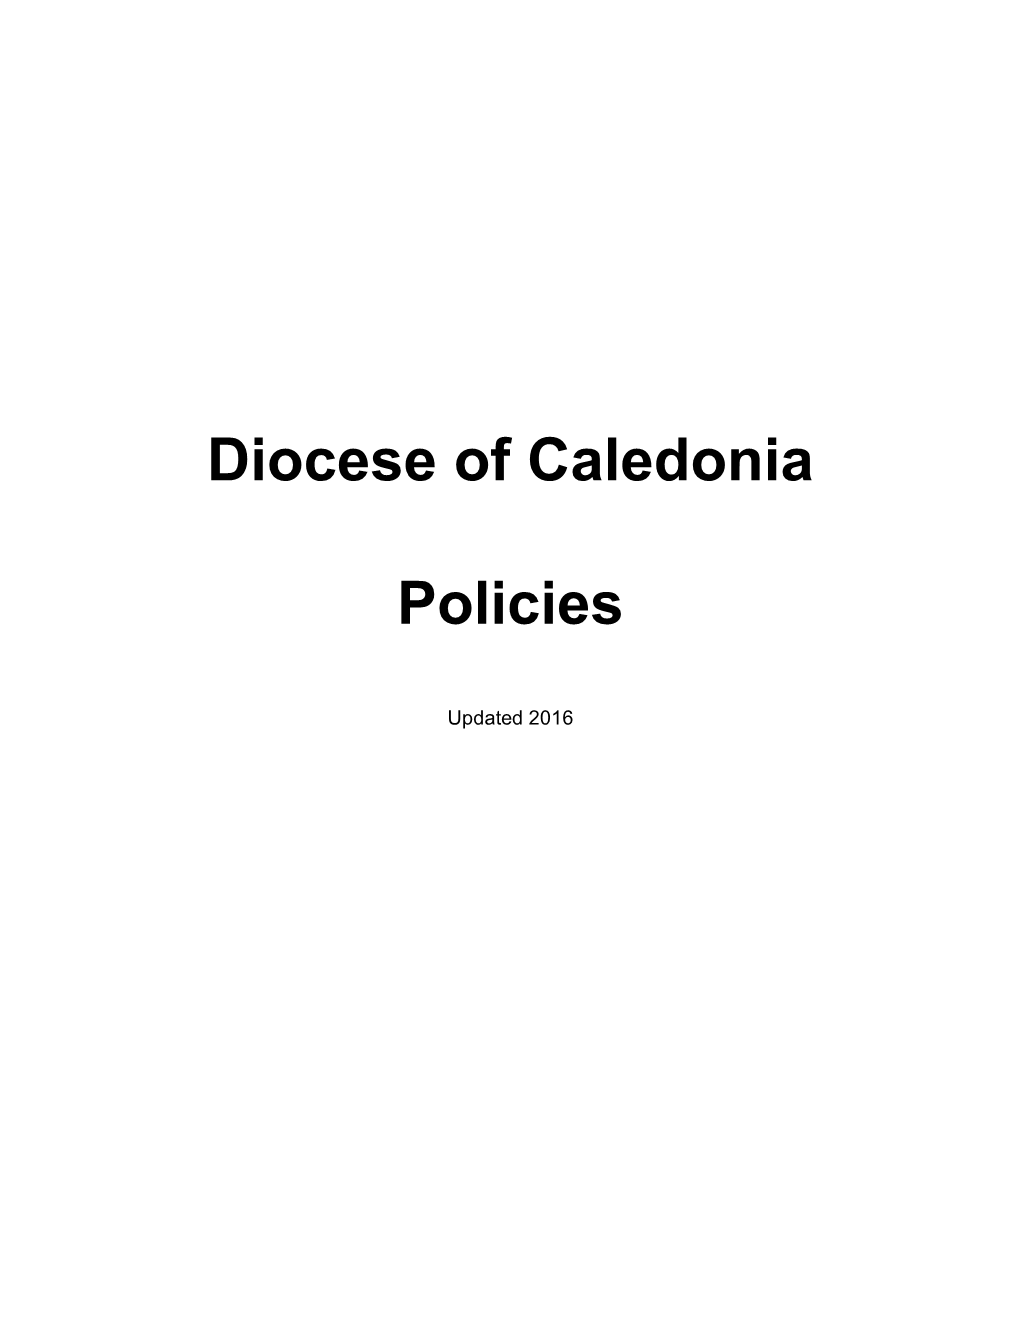 Diocese of Caledonia Policies